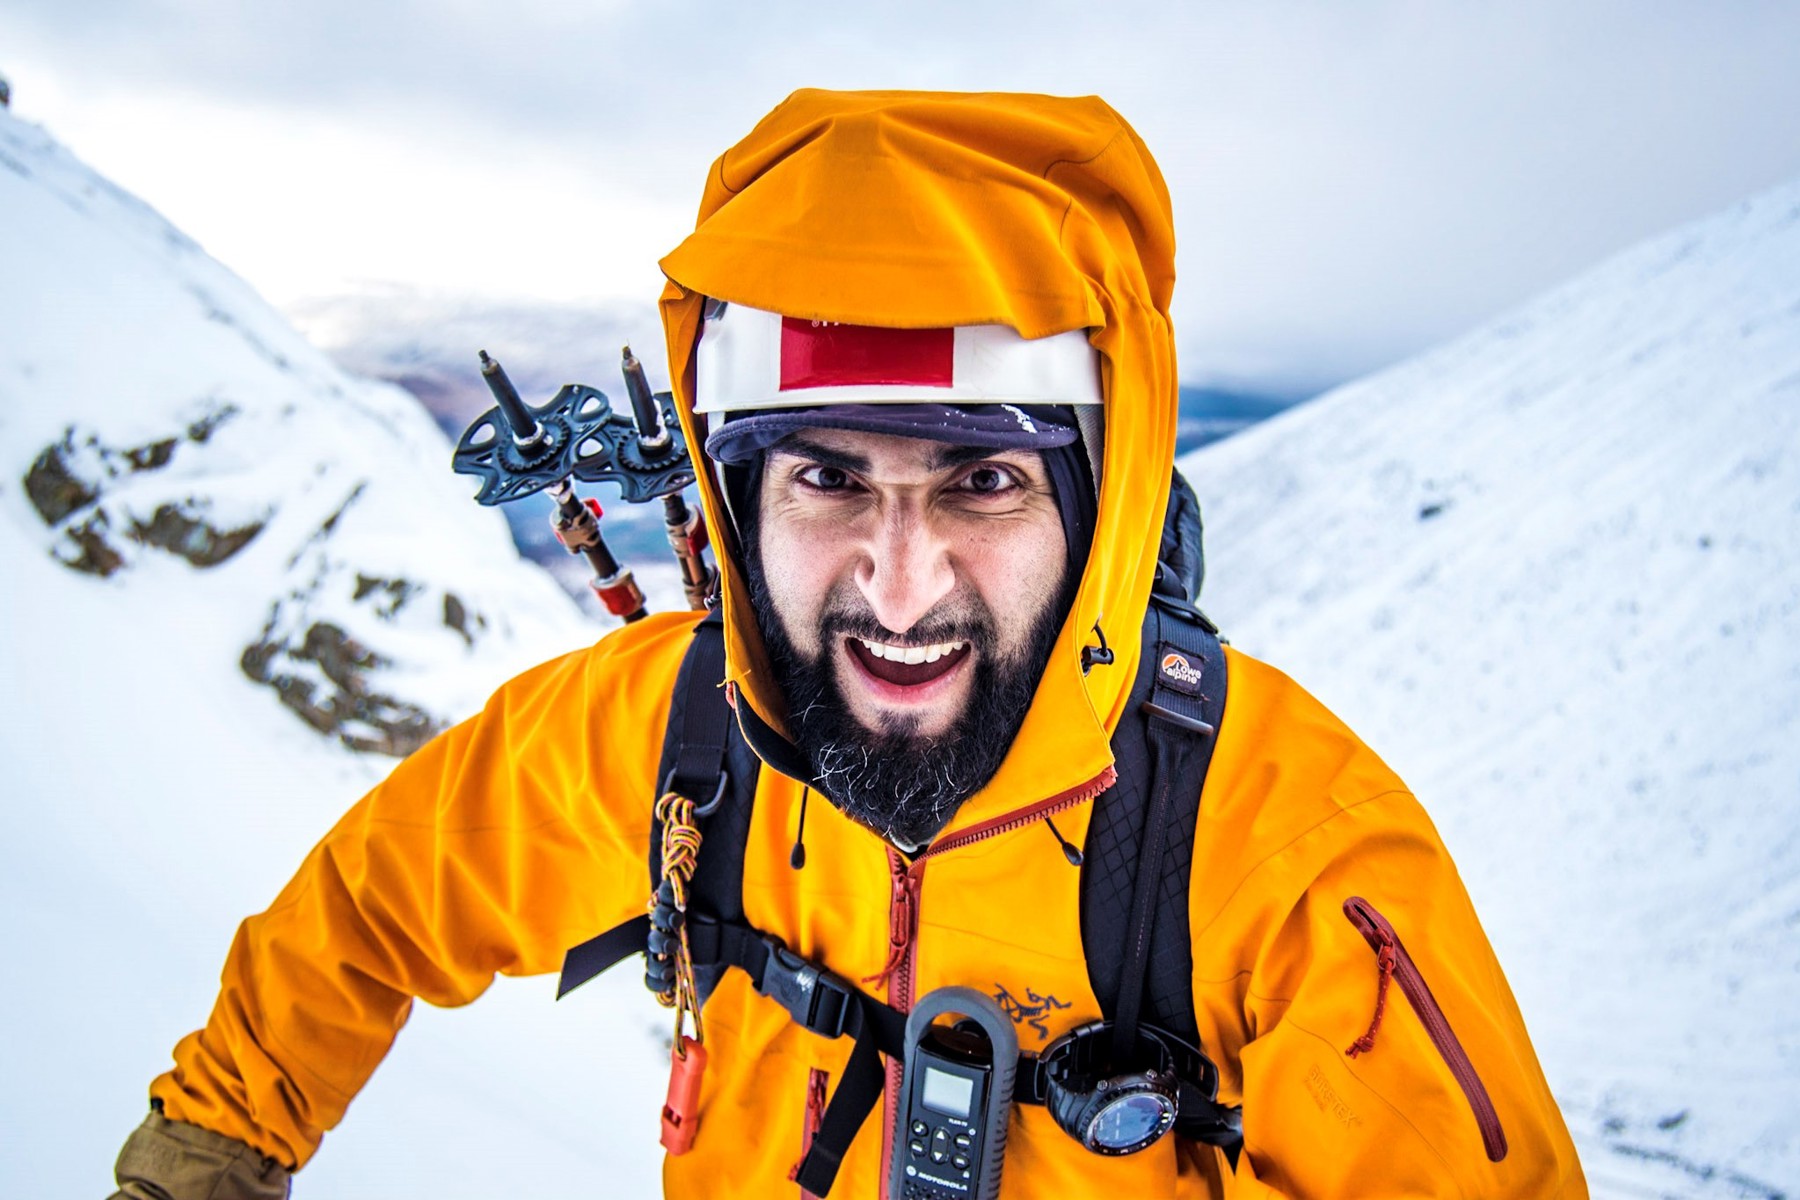 Mahroof smiling nearing a snow peaked summit